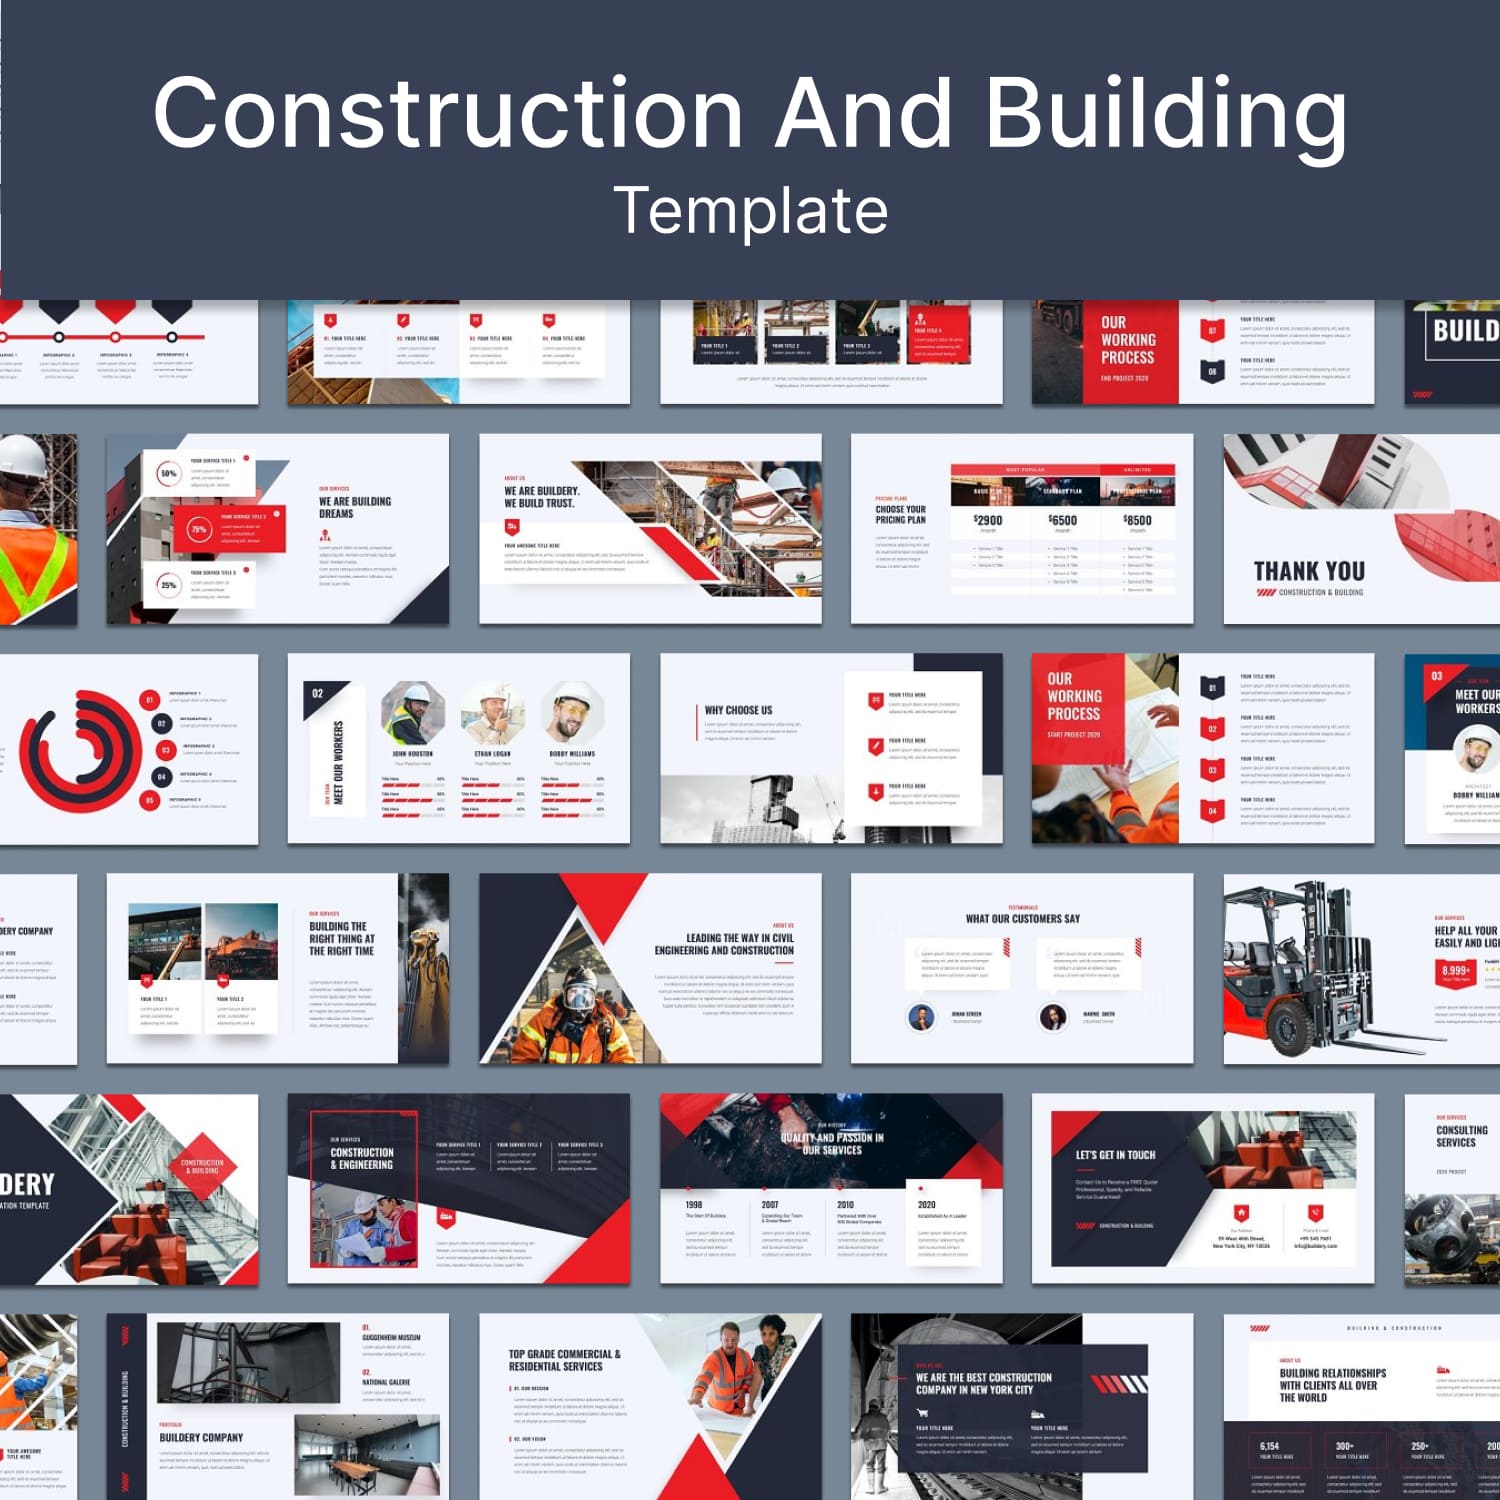 Construction and Building Template.